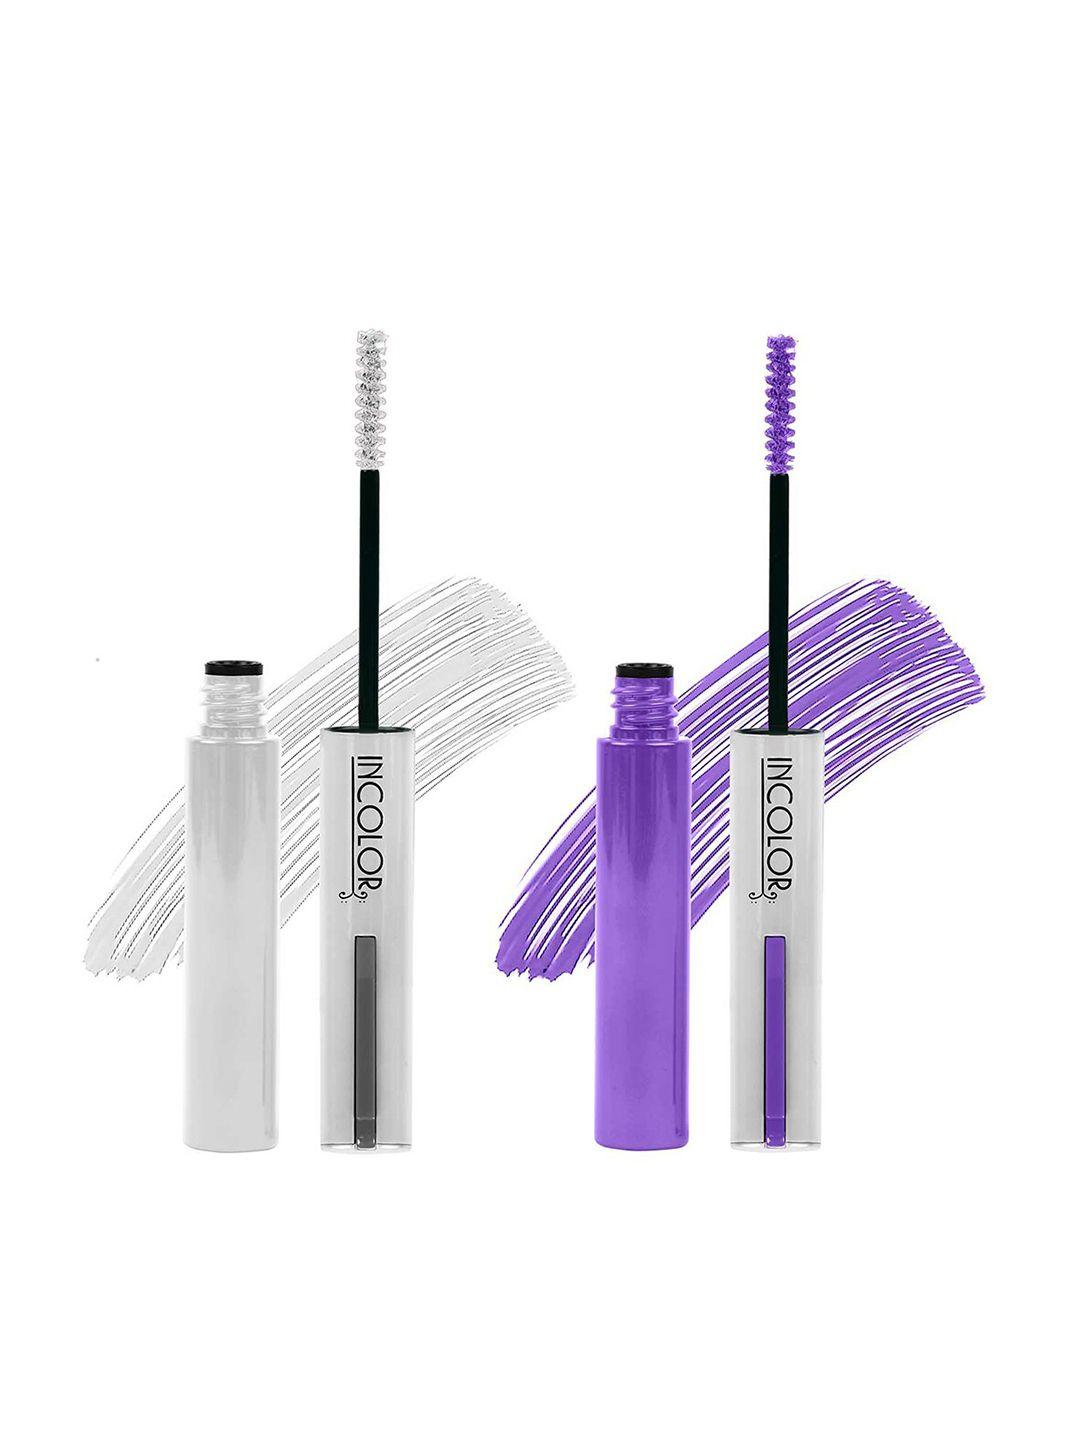 incolor set of 2 light weight color mascara 6ml each - true purple 06 & milky white 02